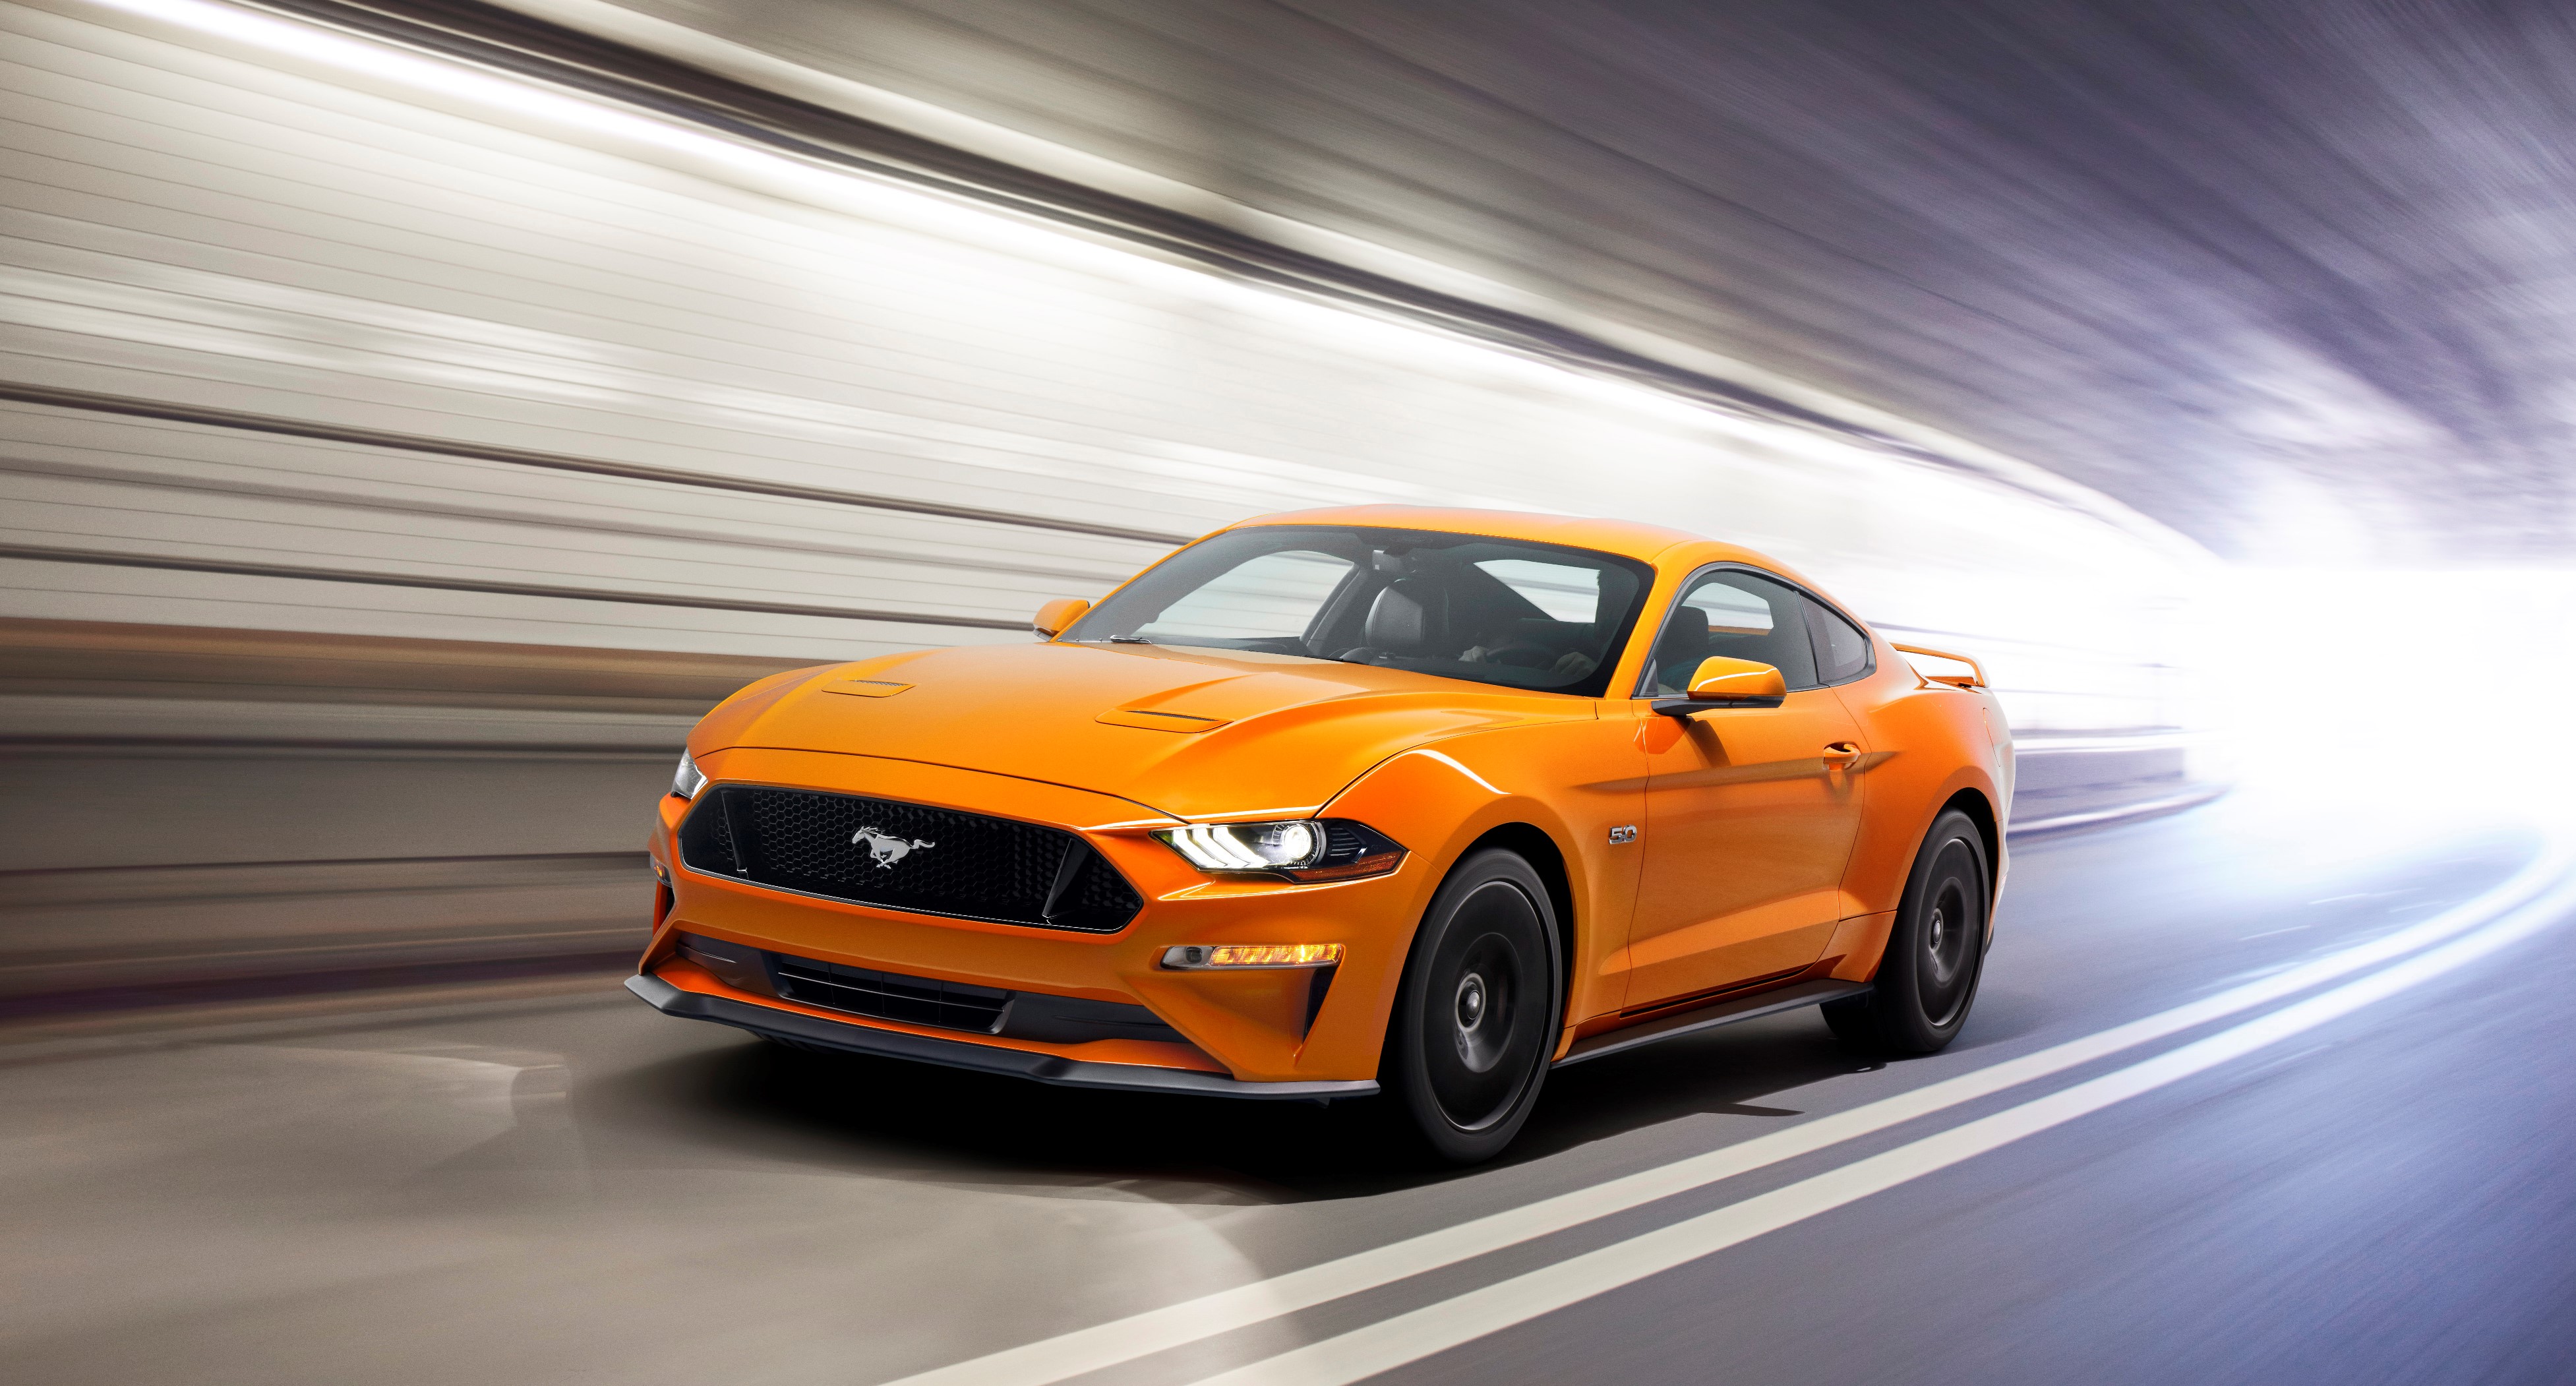 New Ford Mustang V8 GT with Performance Package_01.jpg